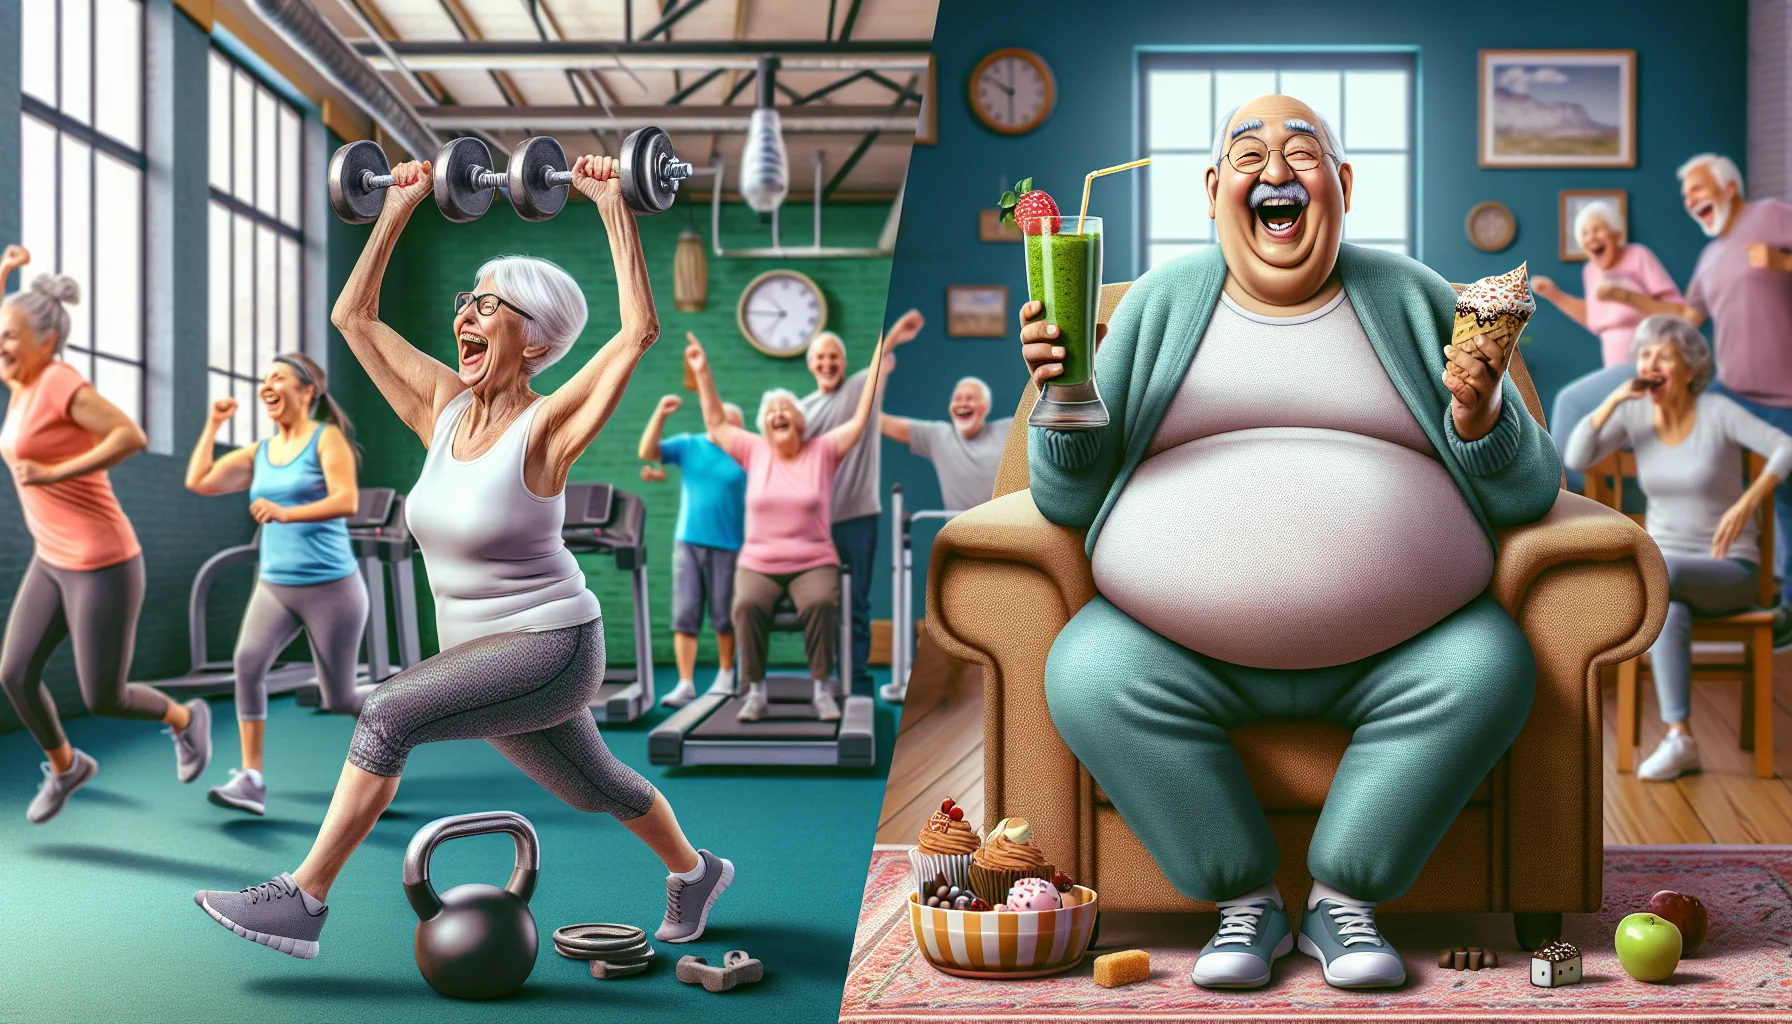 Create a humorous and realistic image depicting the subtle differences in the effects of ageing versus not ageing on the human body. The scene is set in a lively senior center. On the right hand side, depict an energetic old Caucasian woman, laughing heartily as she lifts weights and drinks a green smoothie, illustrating the positive effects of healthy eating and exercise. On the left hand side, illustrate a light-hearted contrast: a joyous elderly South Asian man enjoying his sugary treats, sitting in a comfy chair, with a slightly exaggerated belly. Both are living life joyfully, embodying different choices on aging.